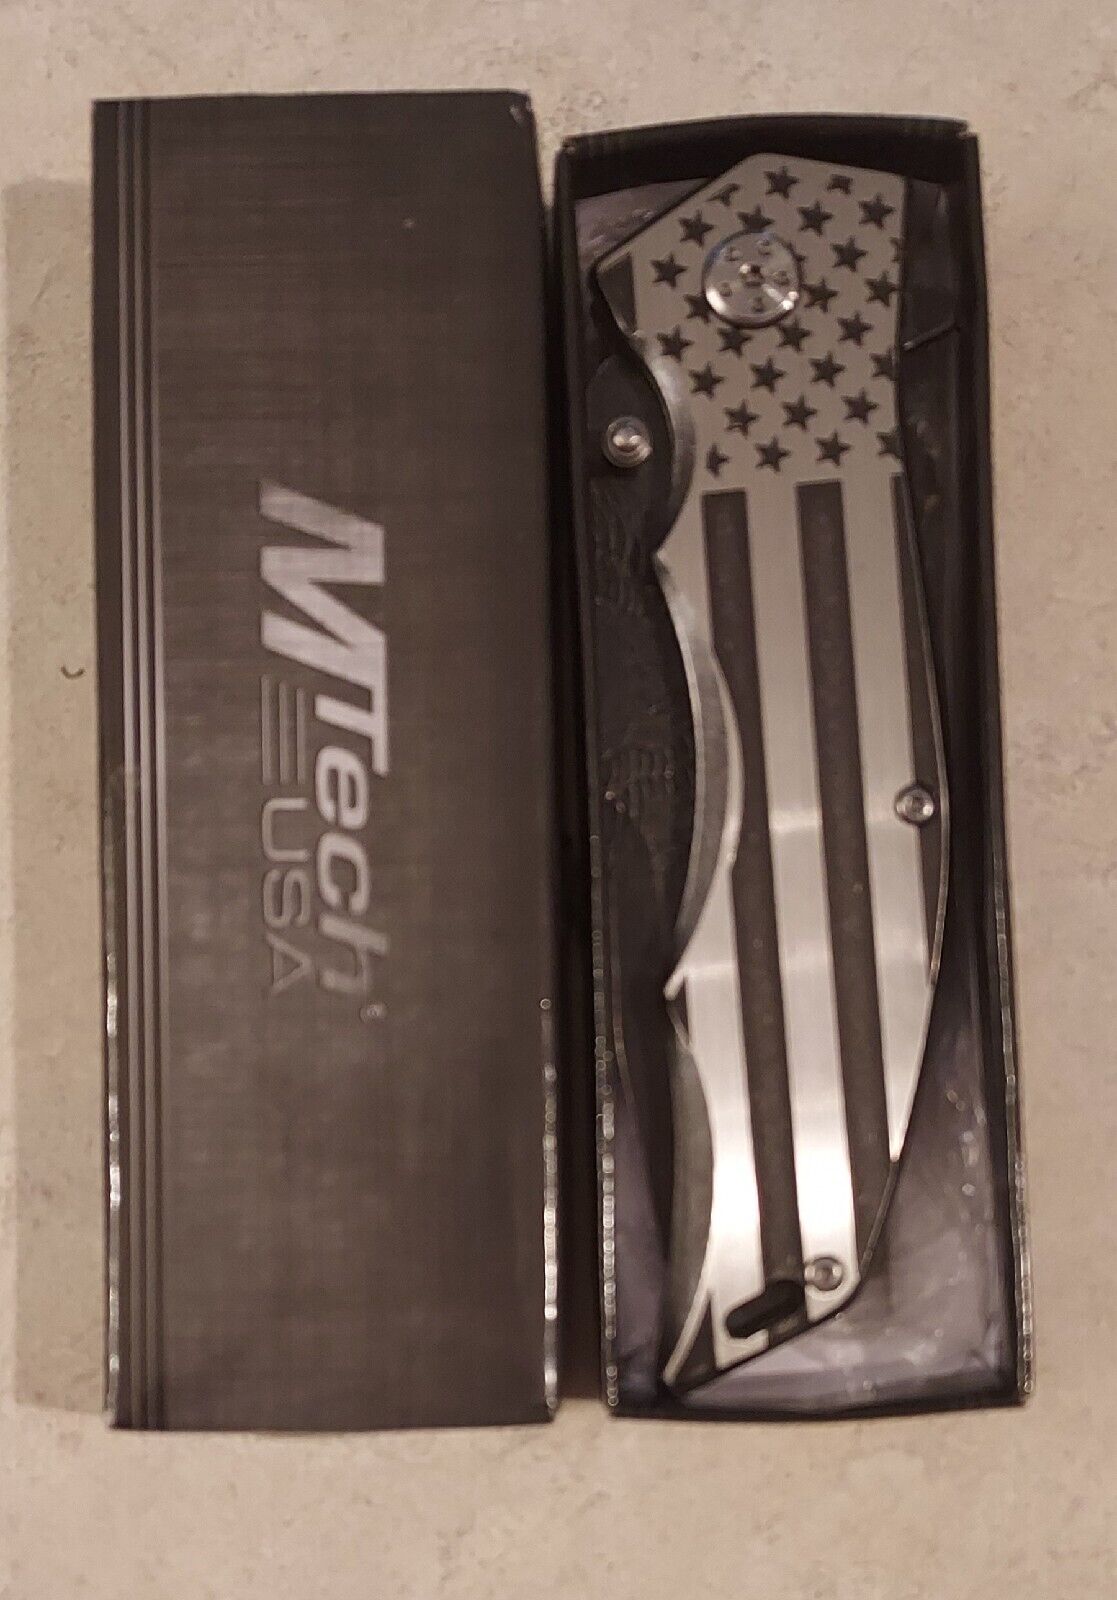 MTech USA American FLAG Spring Assisted Folding Open POCKET KNIFE ARMY PATRIOTIC